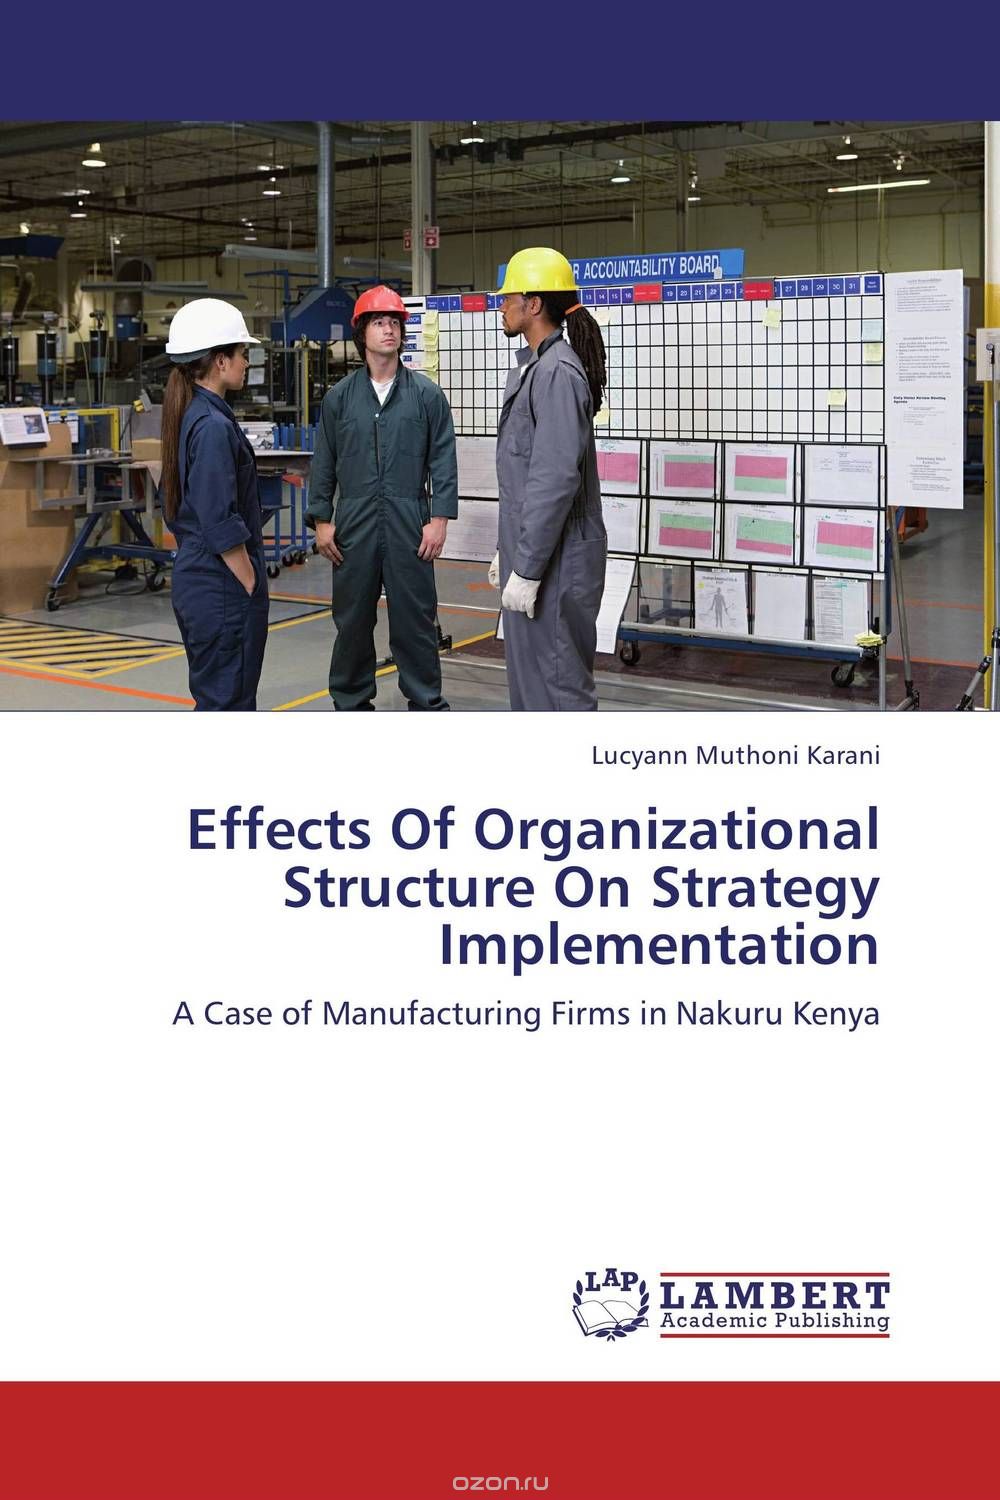 Effects Of Organizational Structure On Strategy Implementation